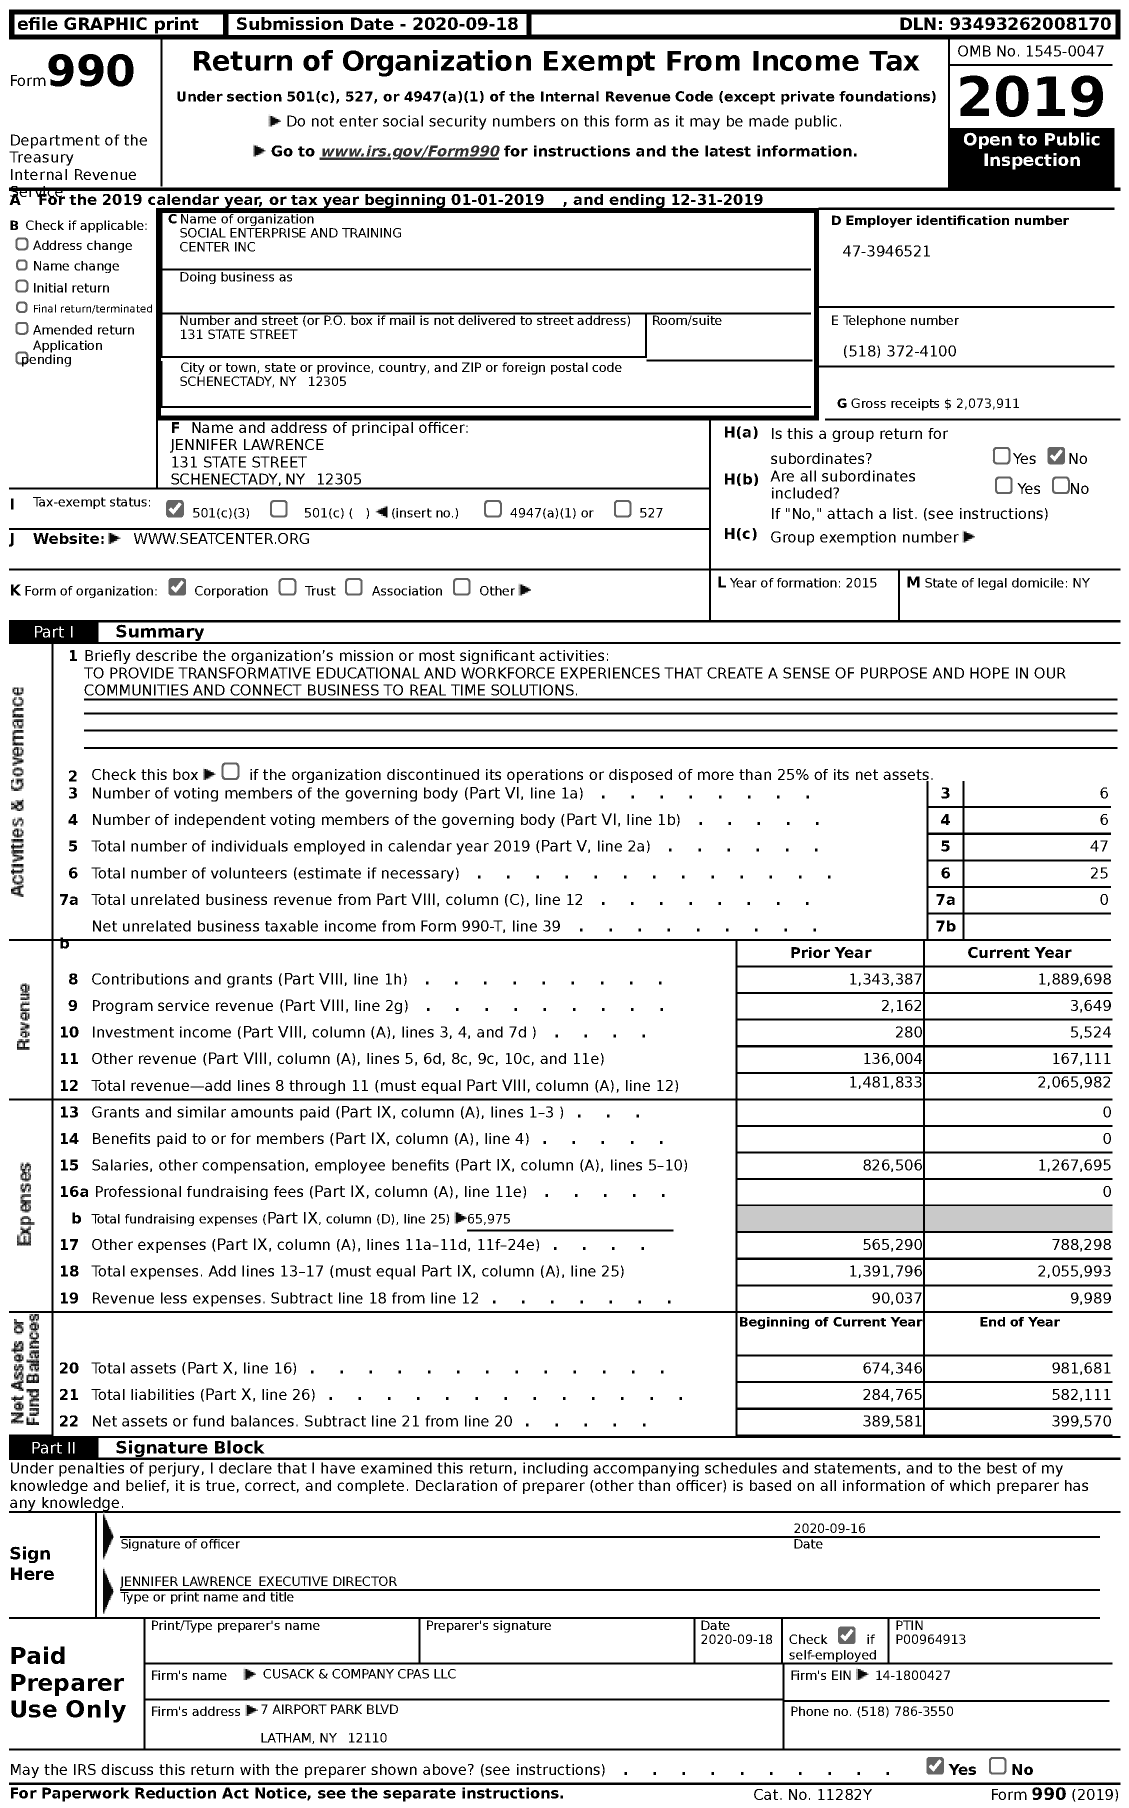 Image of first page of 2019 Form 990 for Social Enterprise and Training Center